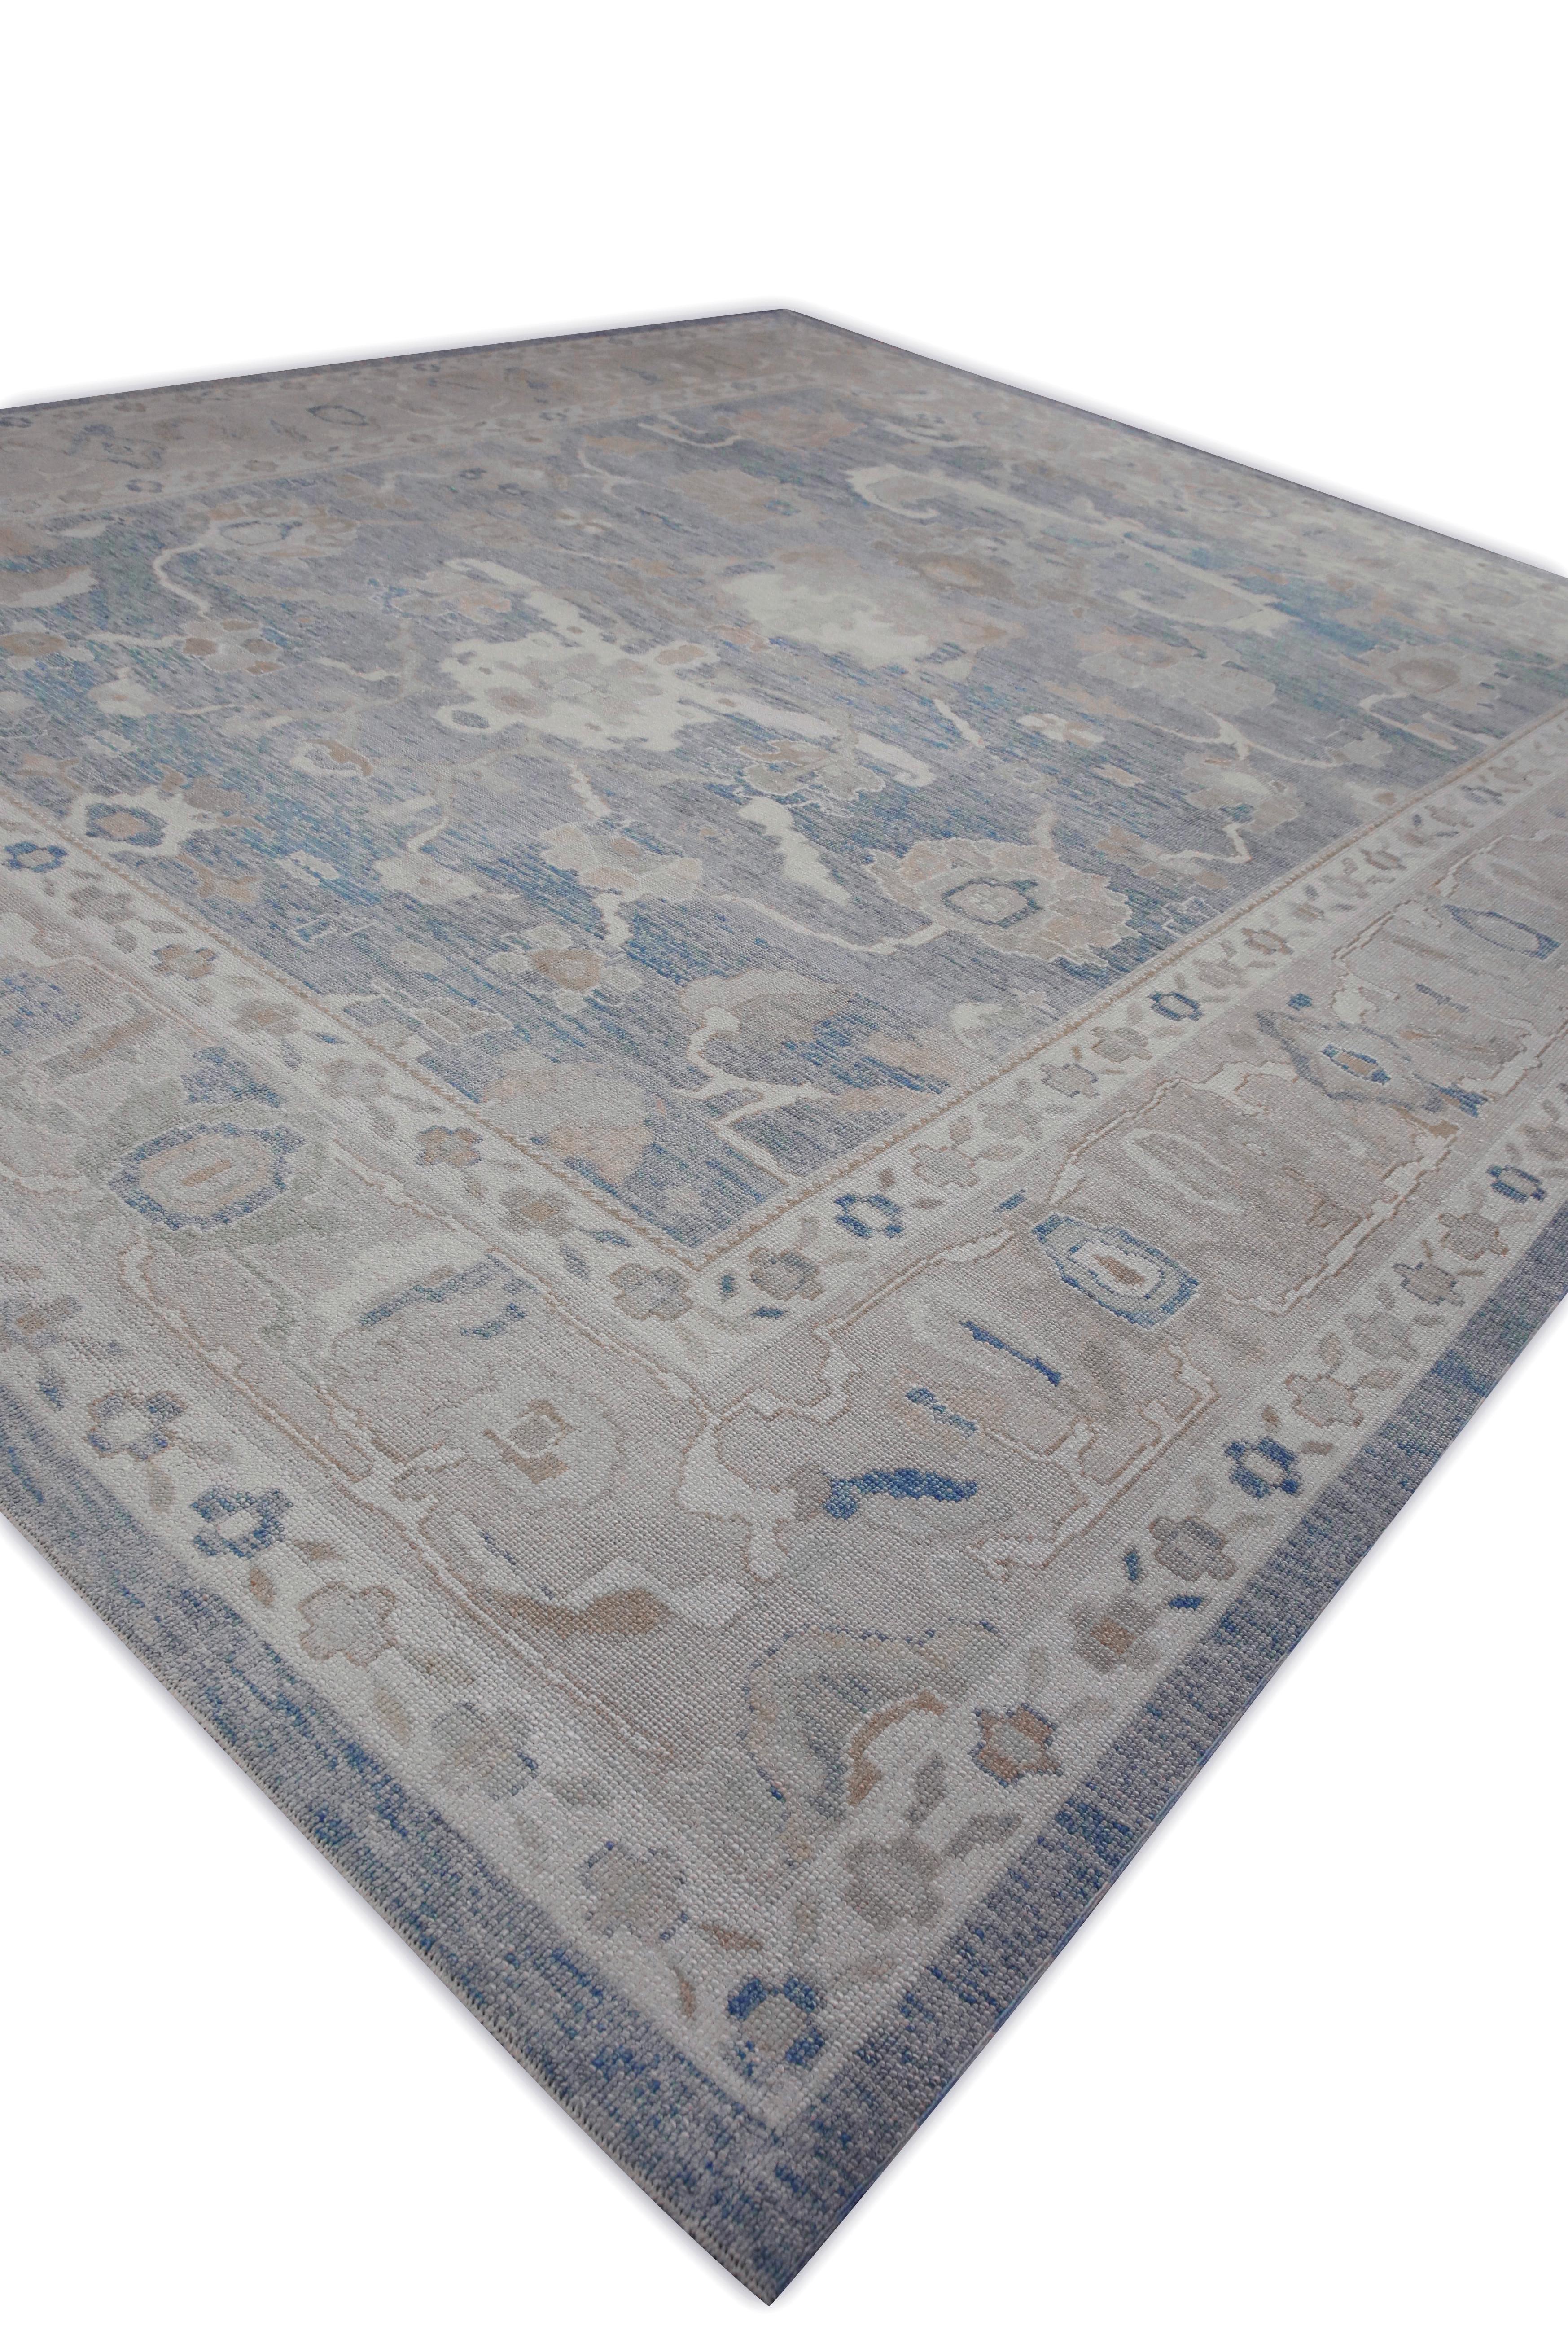 Contemporary Blue & Taupe Floral Design Handwoven Wool Turkish Oushak Rug 12'6